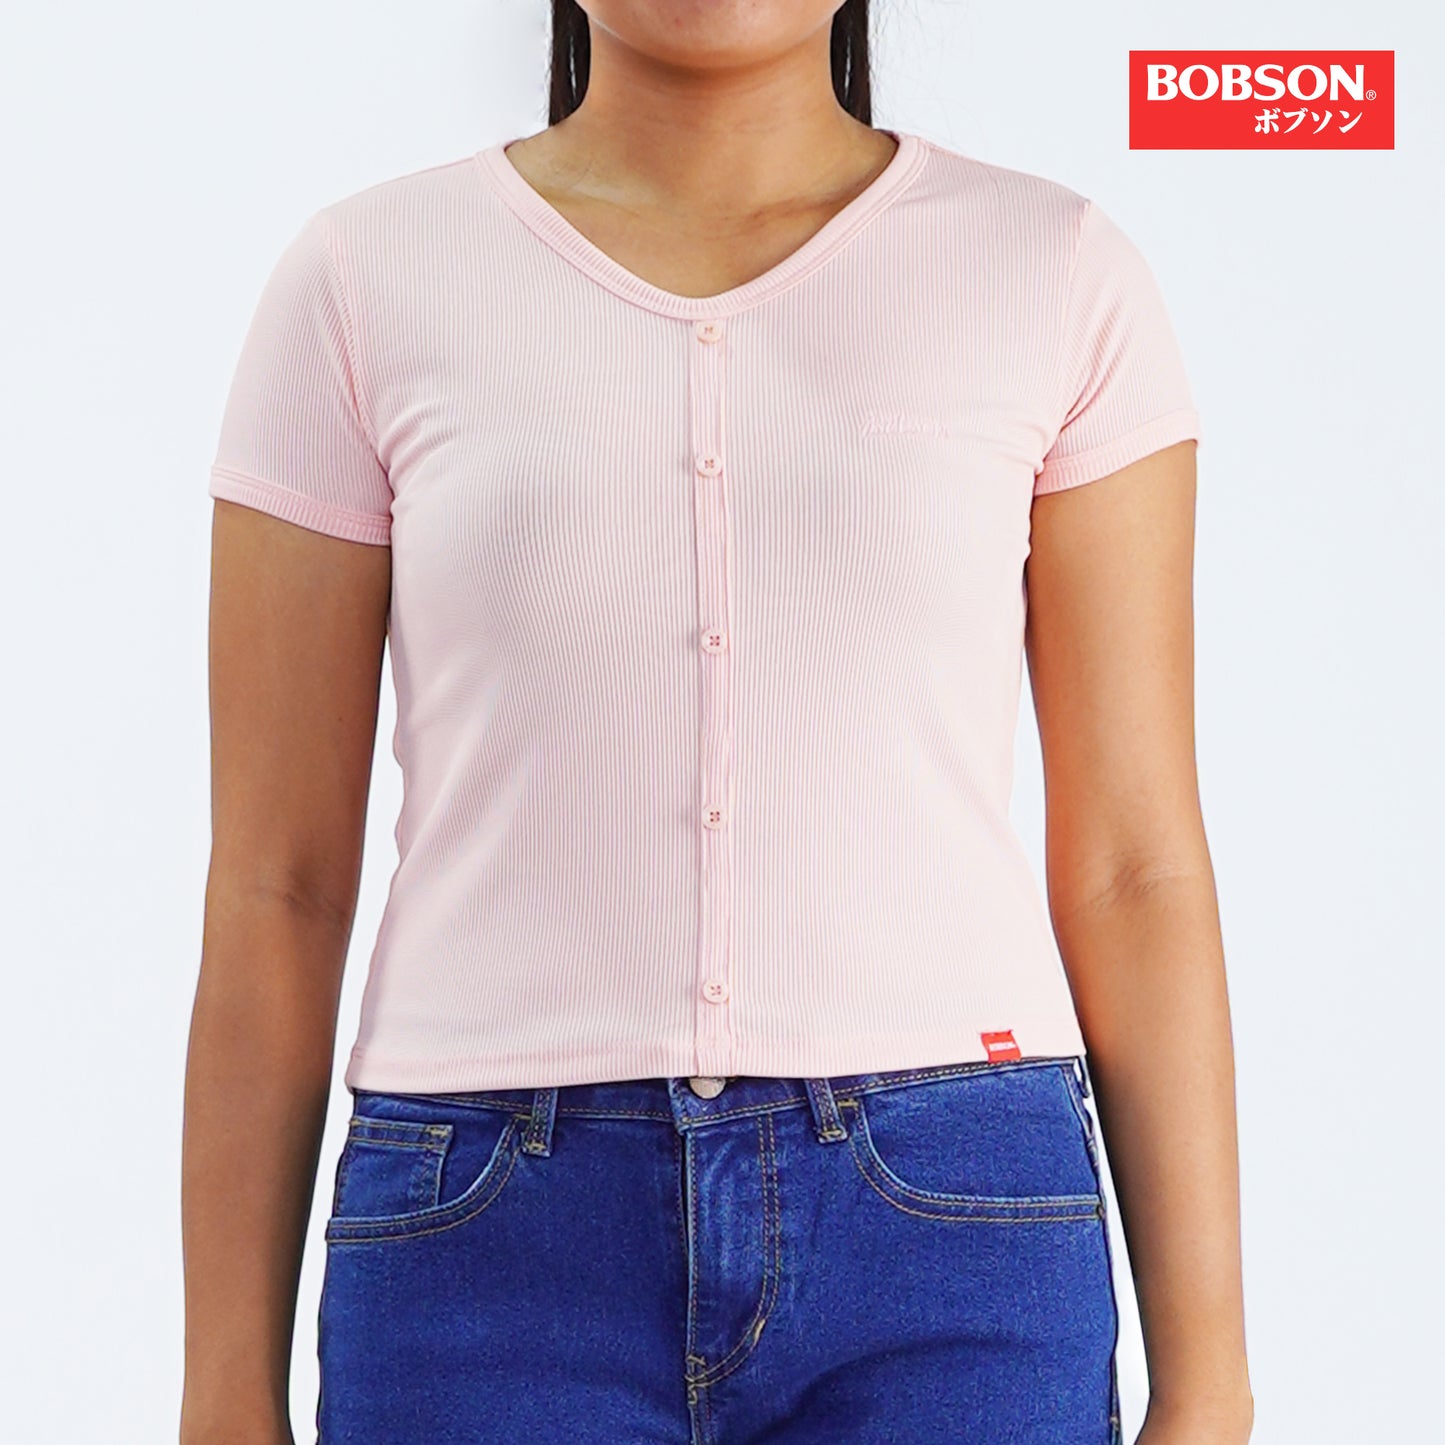 Bobson Japanese Ladies Basic Tees for Women Trendy fashion High Quality Apparel Comfortable Casual Top for Women Crop Fit 146603-U (Pink)